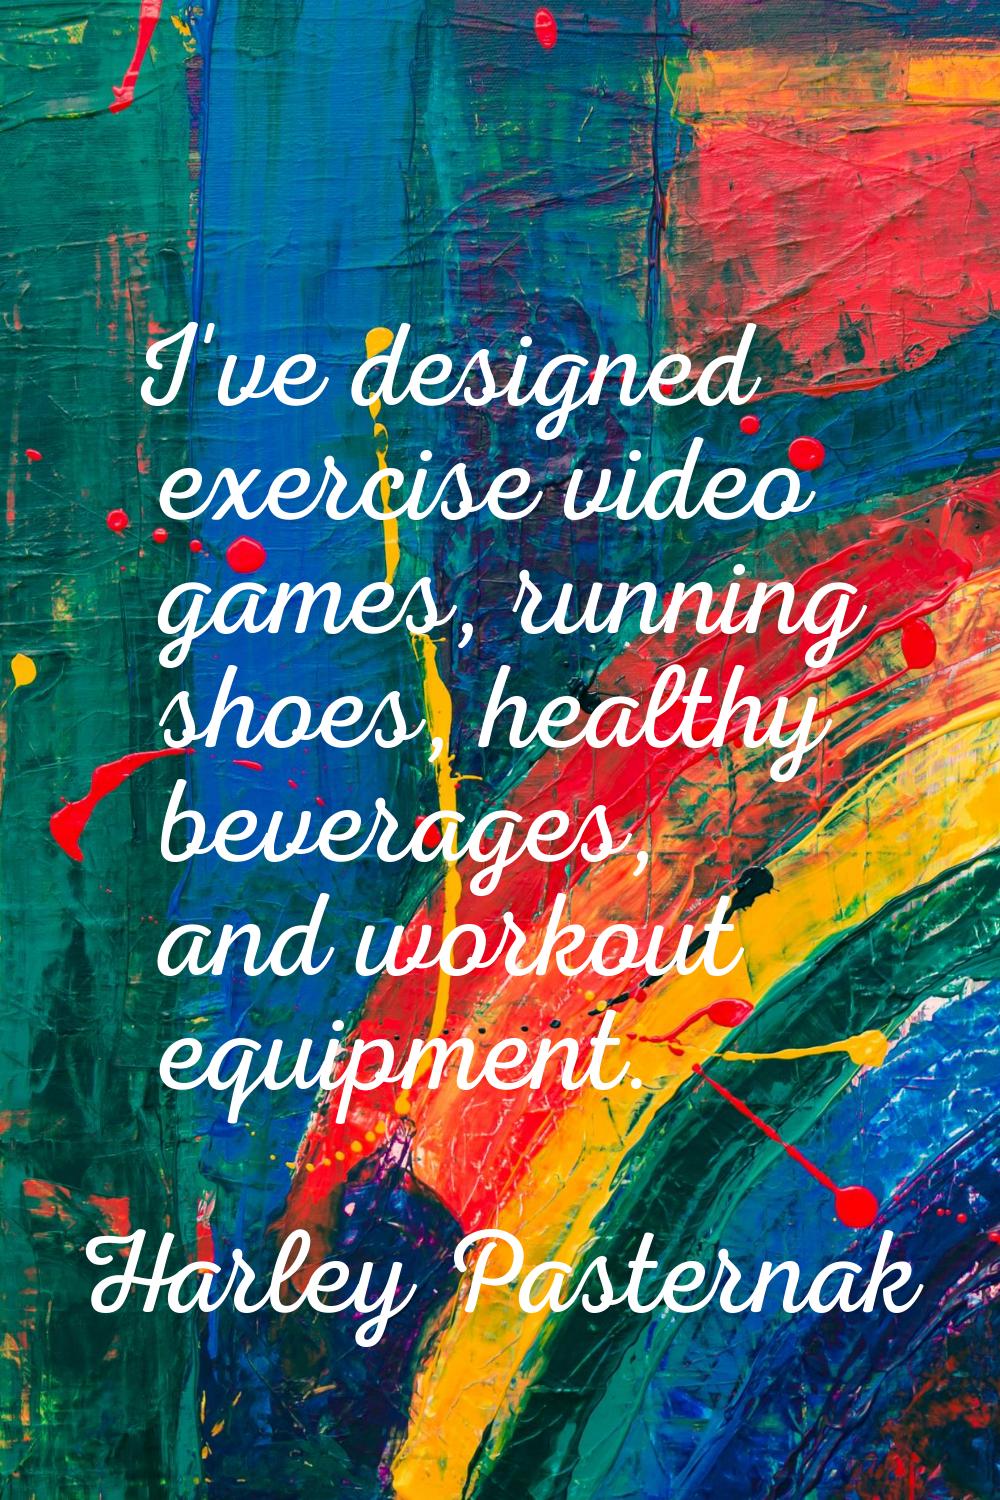 I've designed exercise video games, running shoes, healthy beverages, and workout equipment.